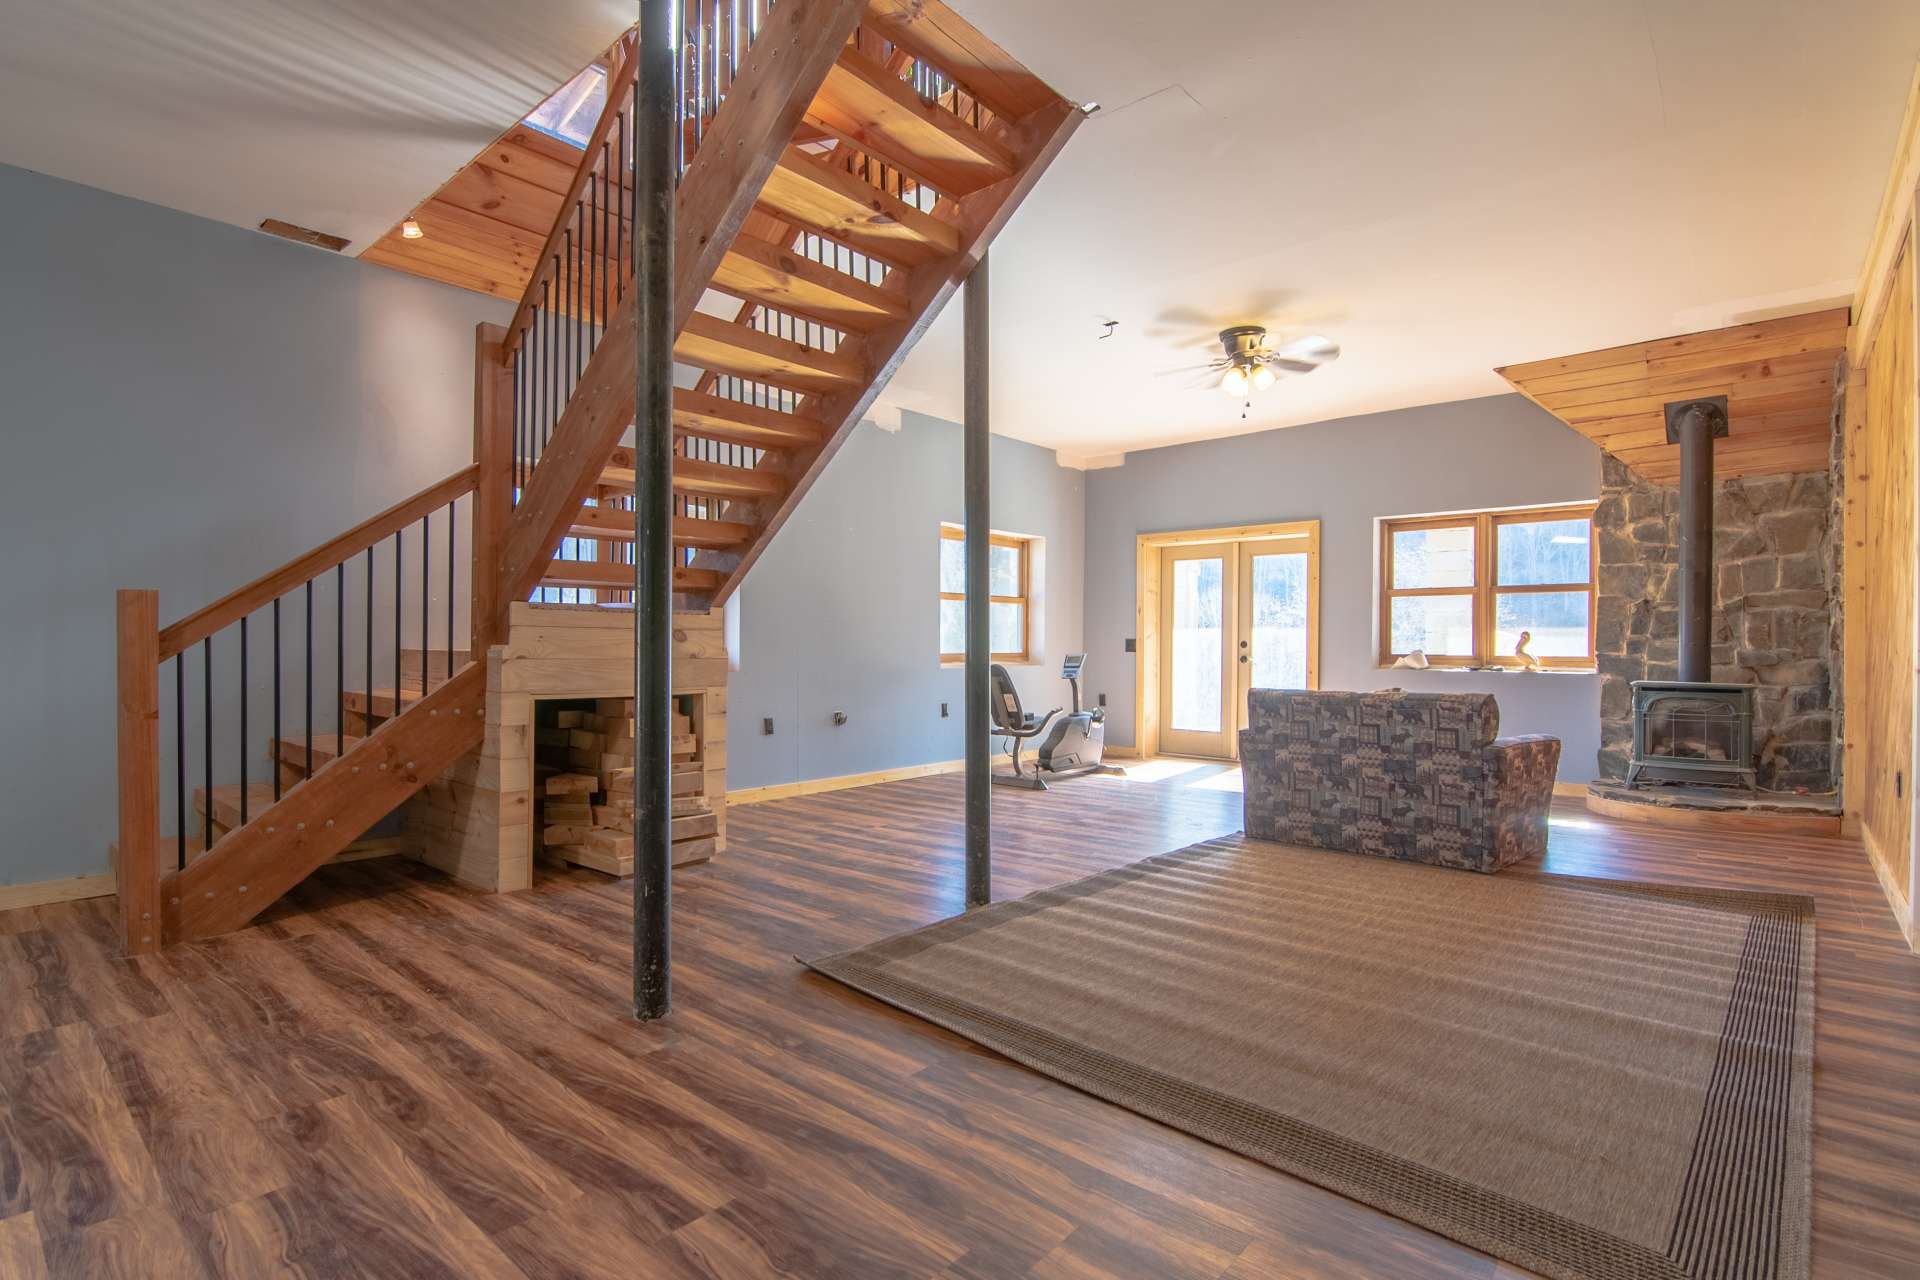 On the lower level, you will find a large  family or game room, the third master suite option, full bath, and access to the lower patio with hot tub.